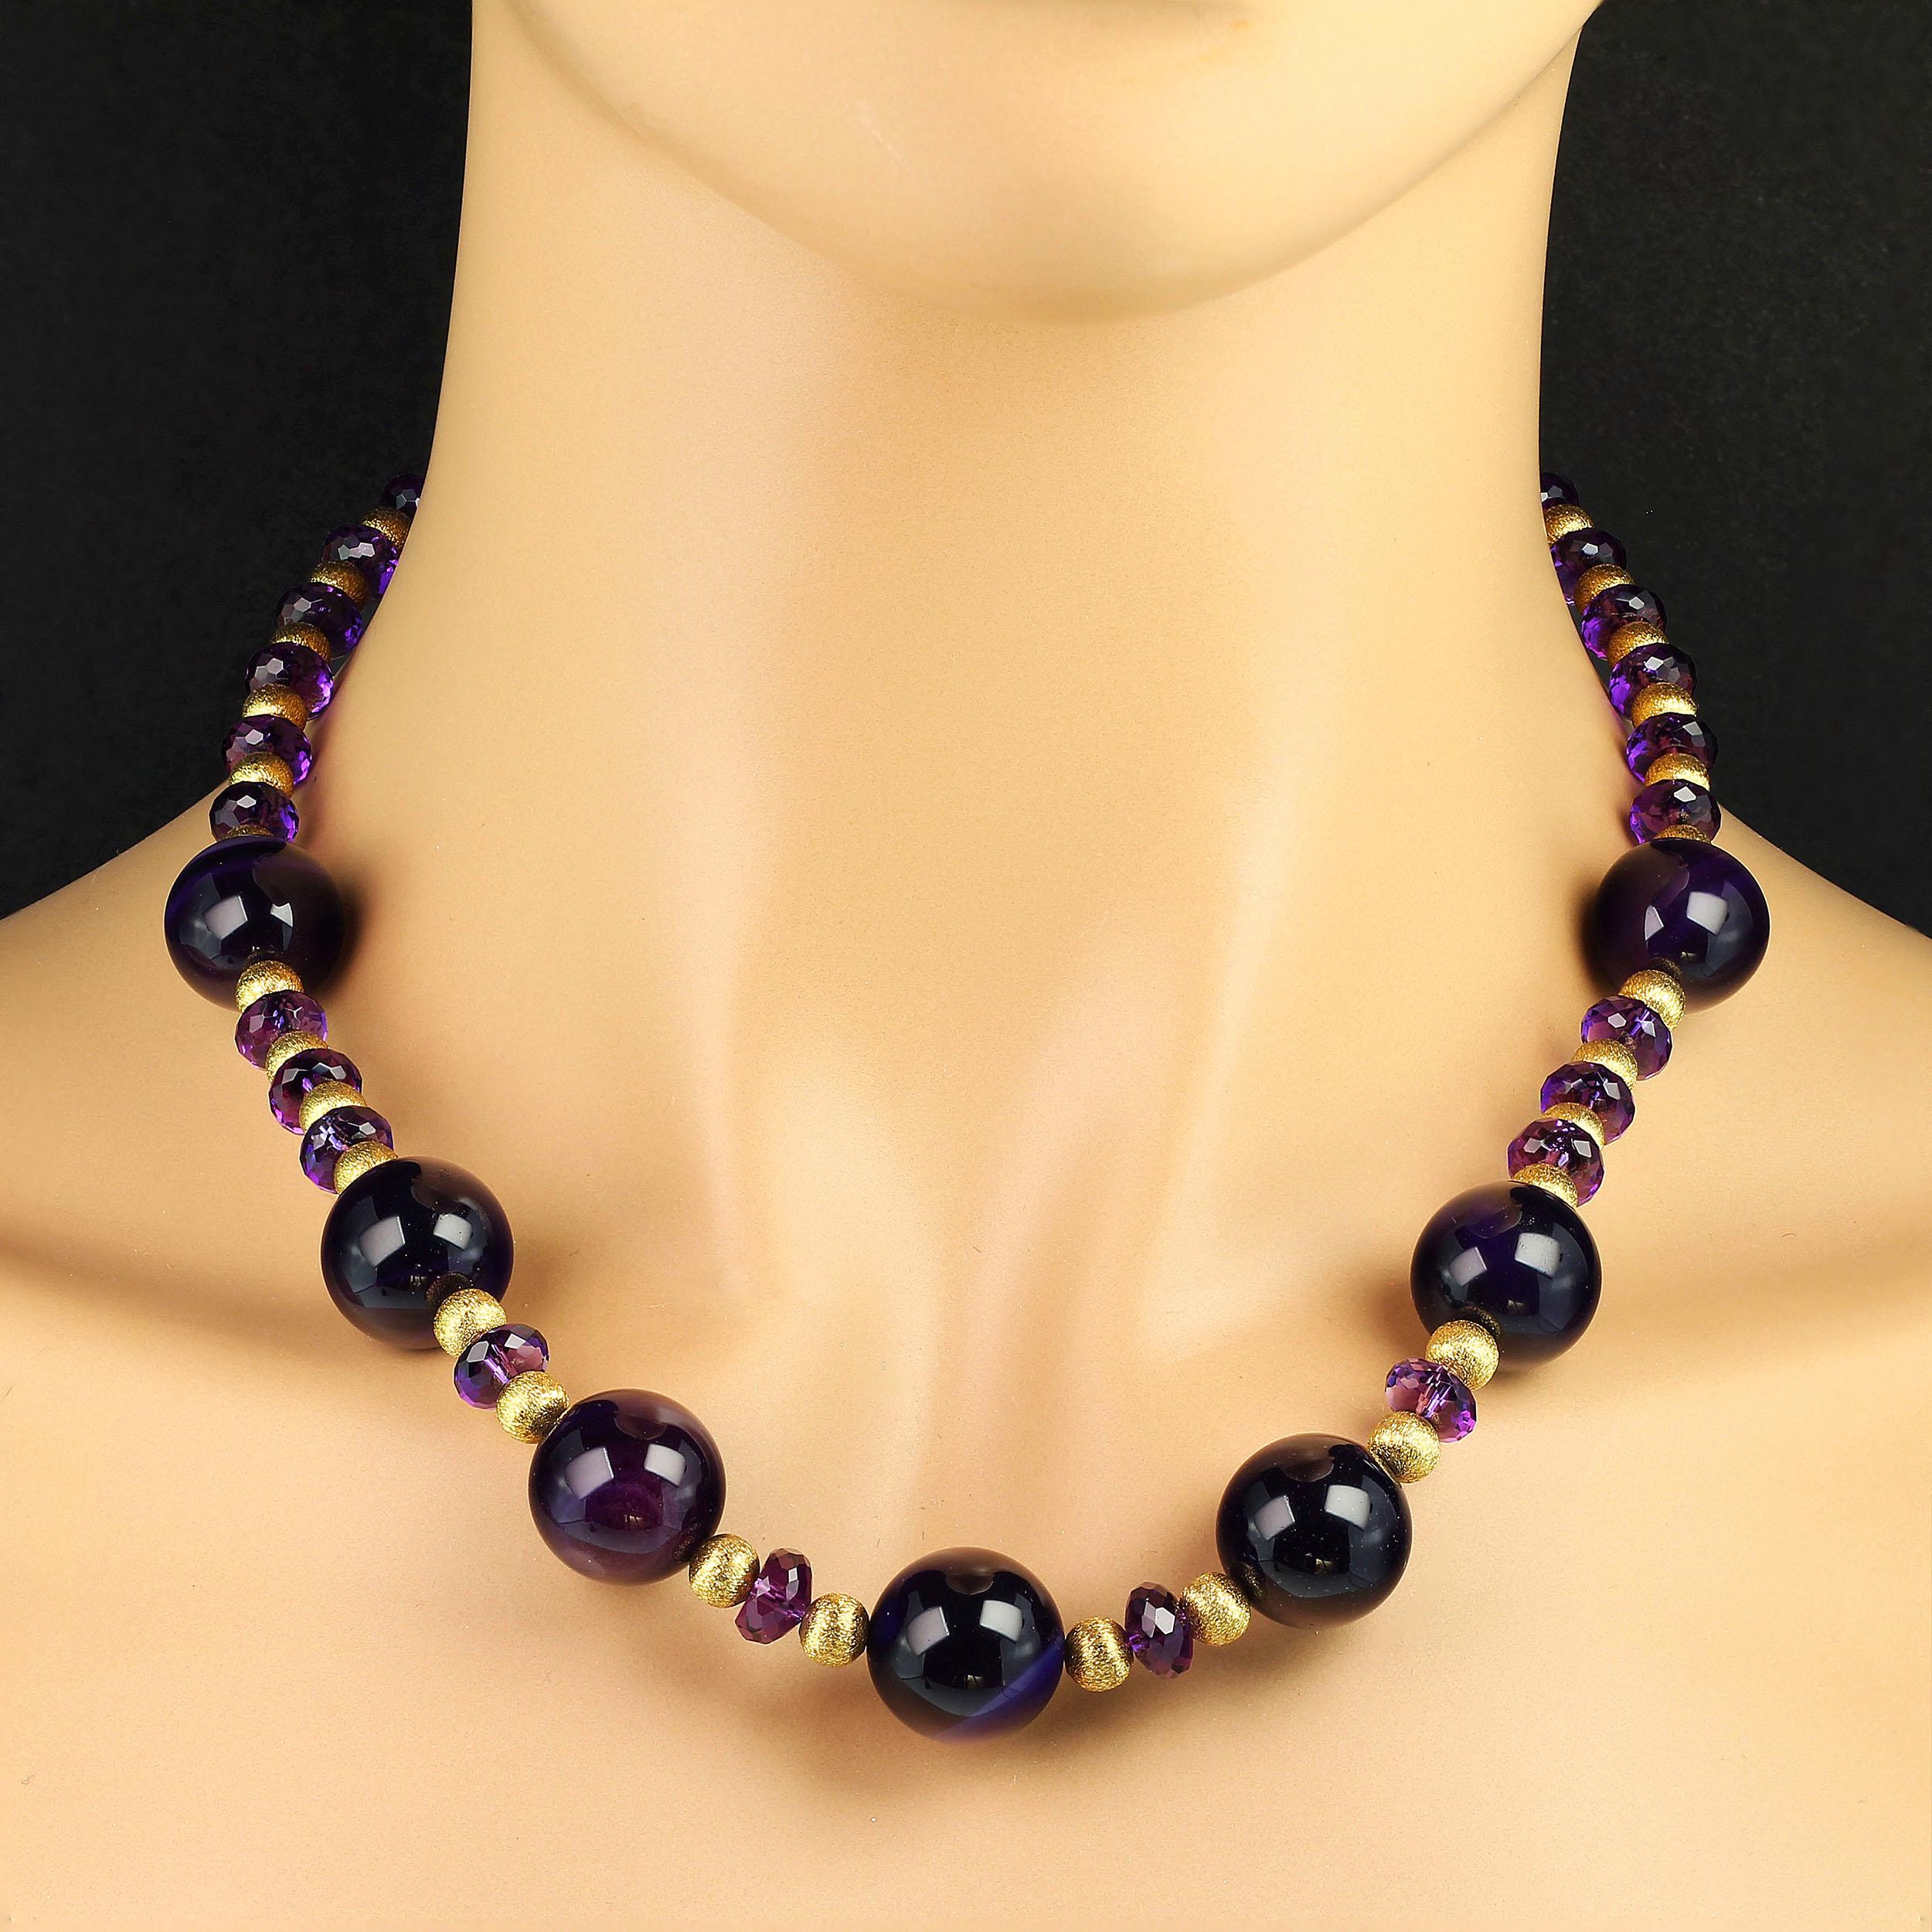 Deep purple Amethyst necklace of 16 mm spheres alternating with sparkling faceted 8 mm rondelles of Amethyst and etched gold tone spacers. The entire presentations shouts Amethyst, the February birthstone. Amethyst should always be a part of your